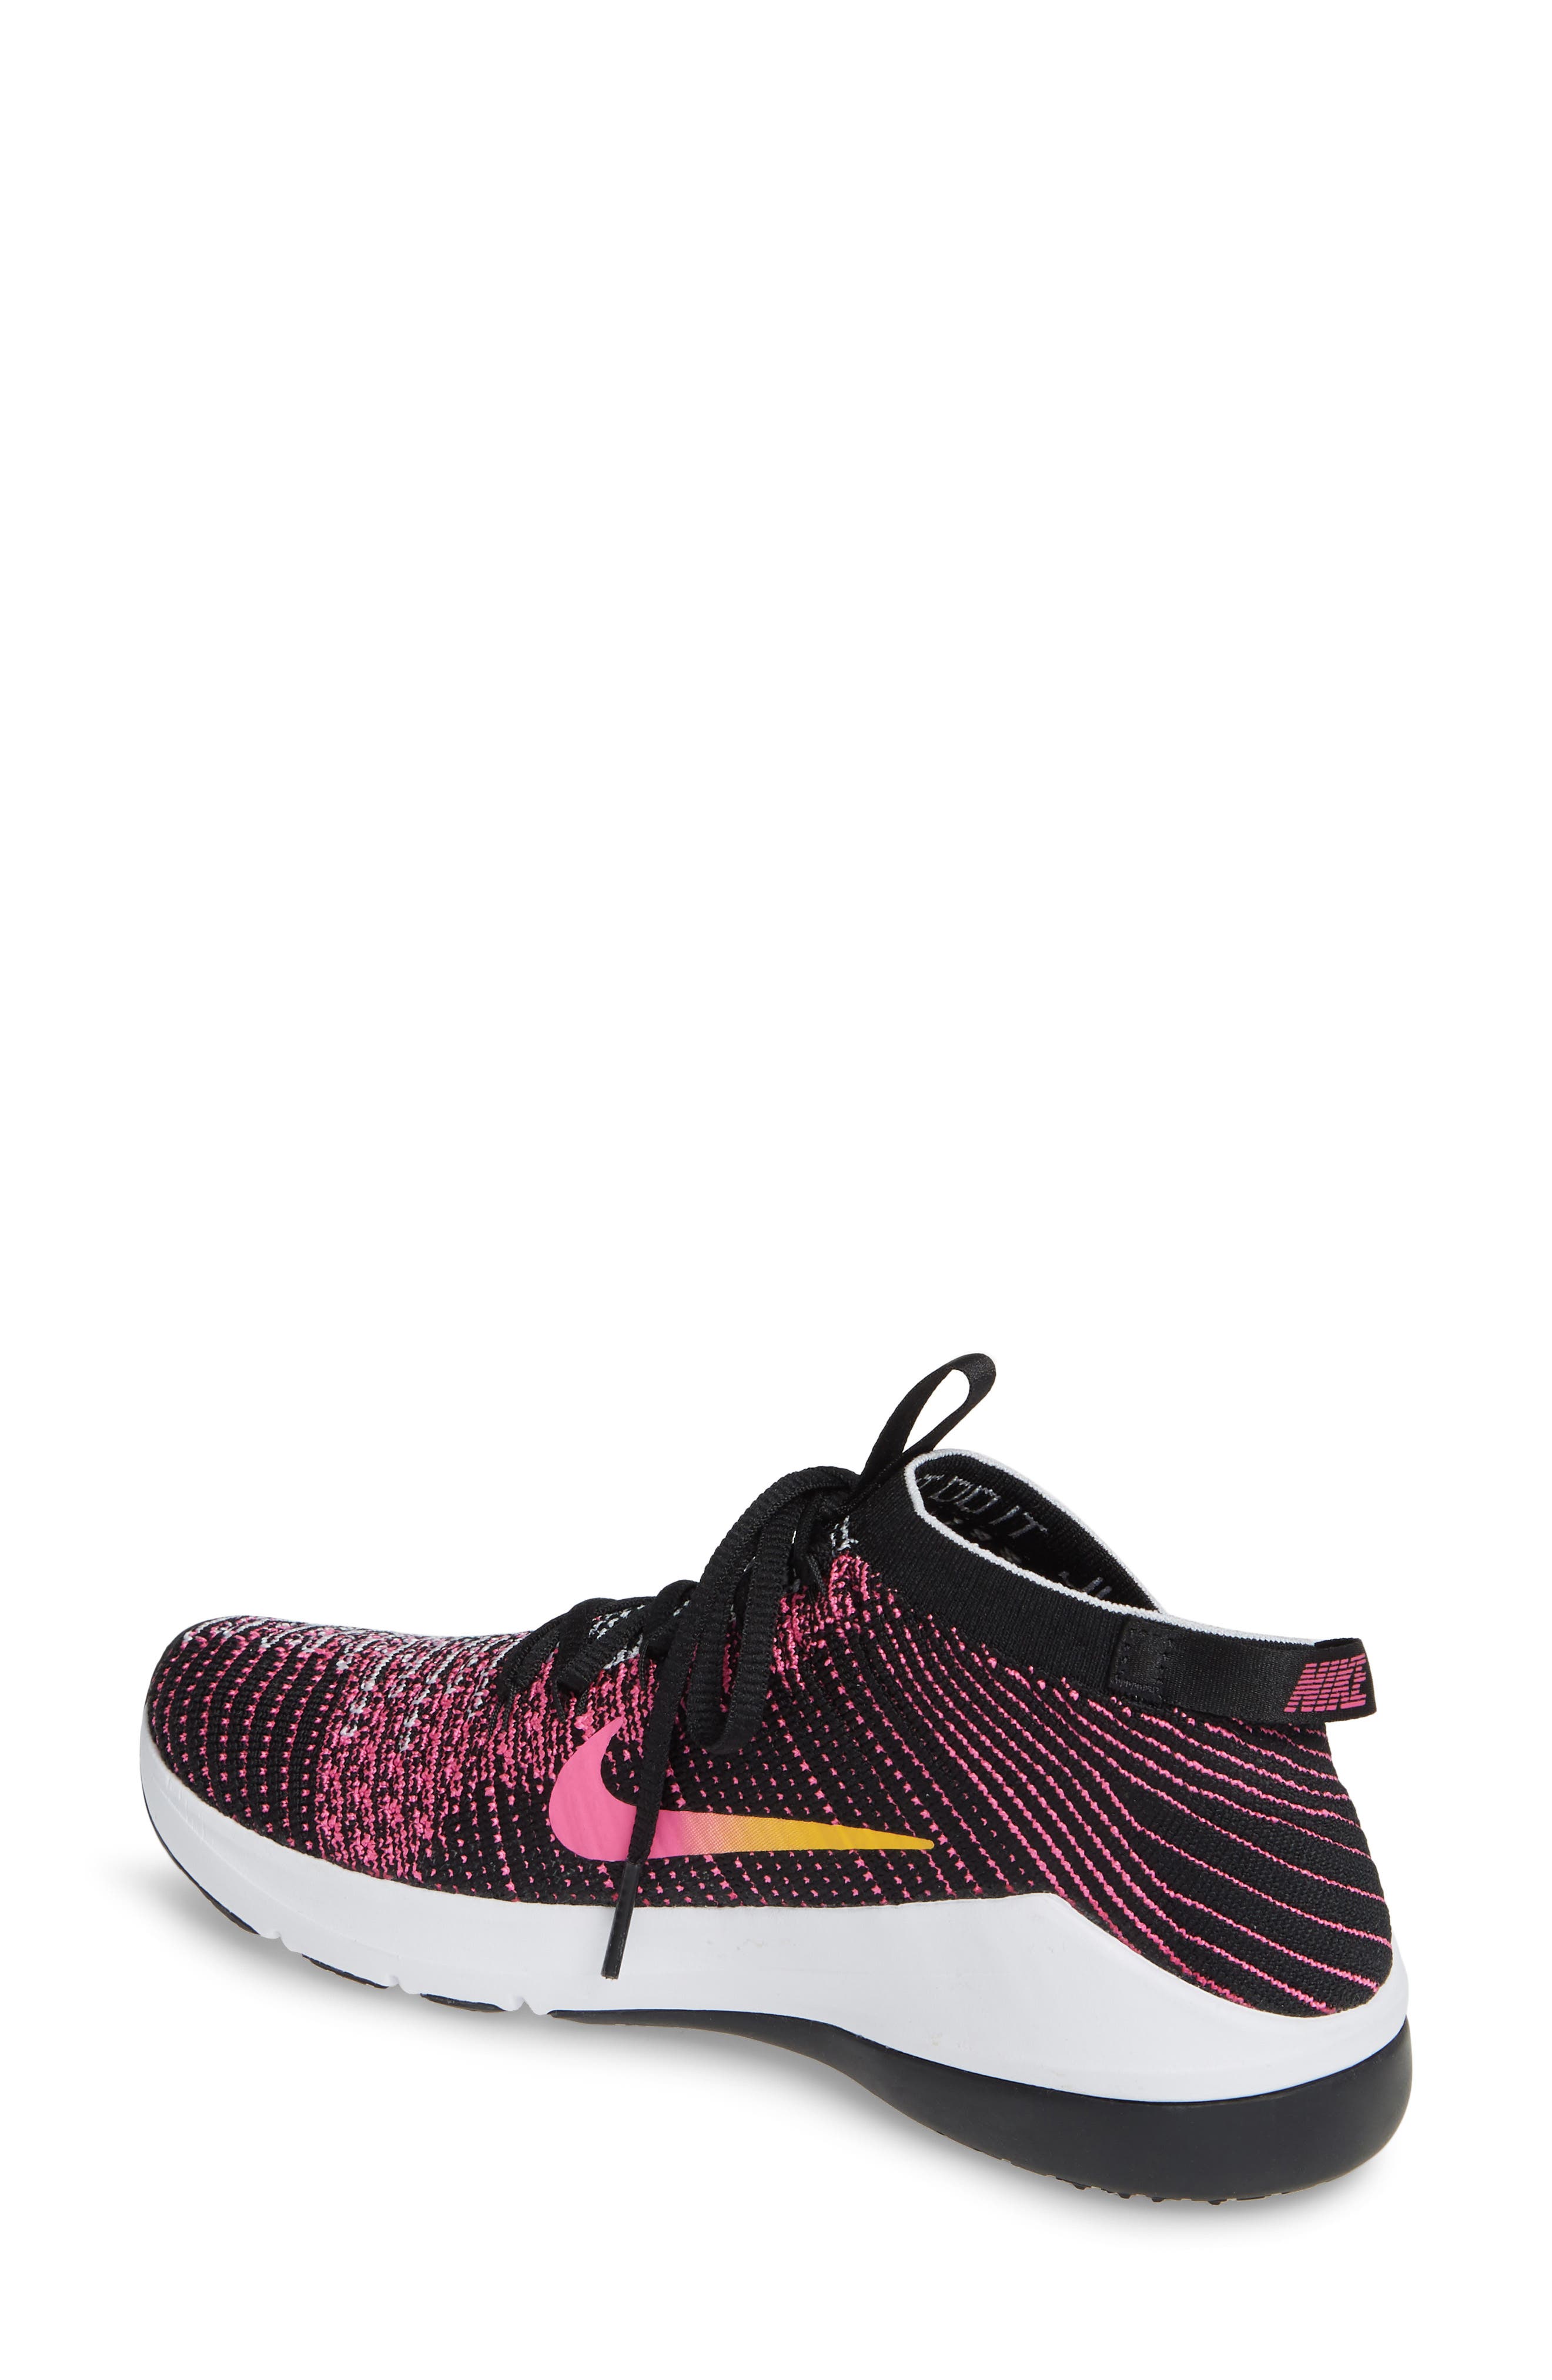 zoom air fearless flyknit 2 amp training